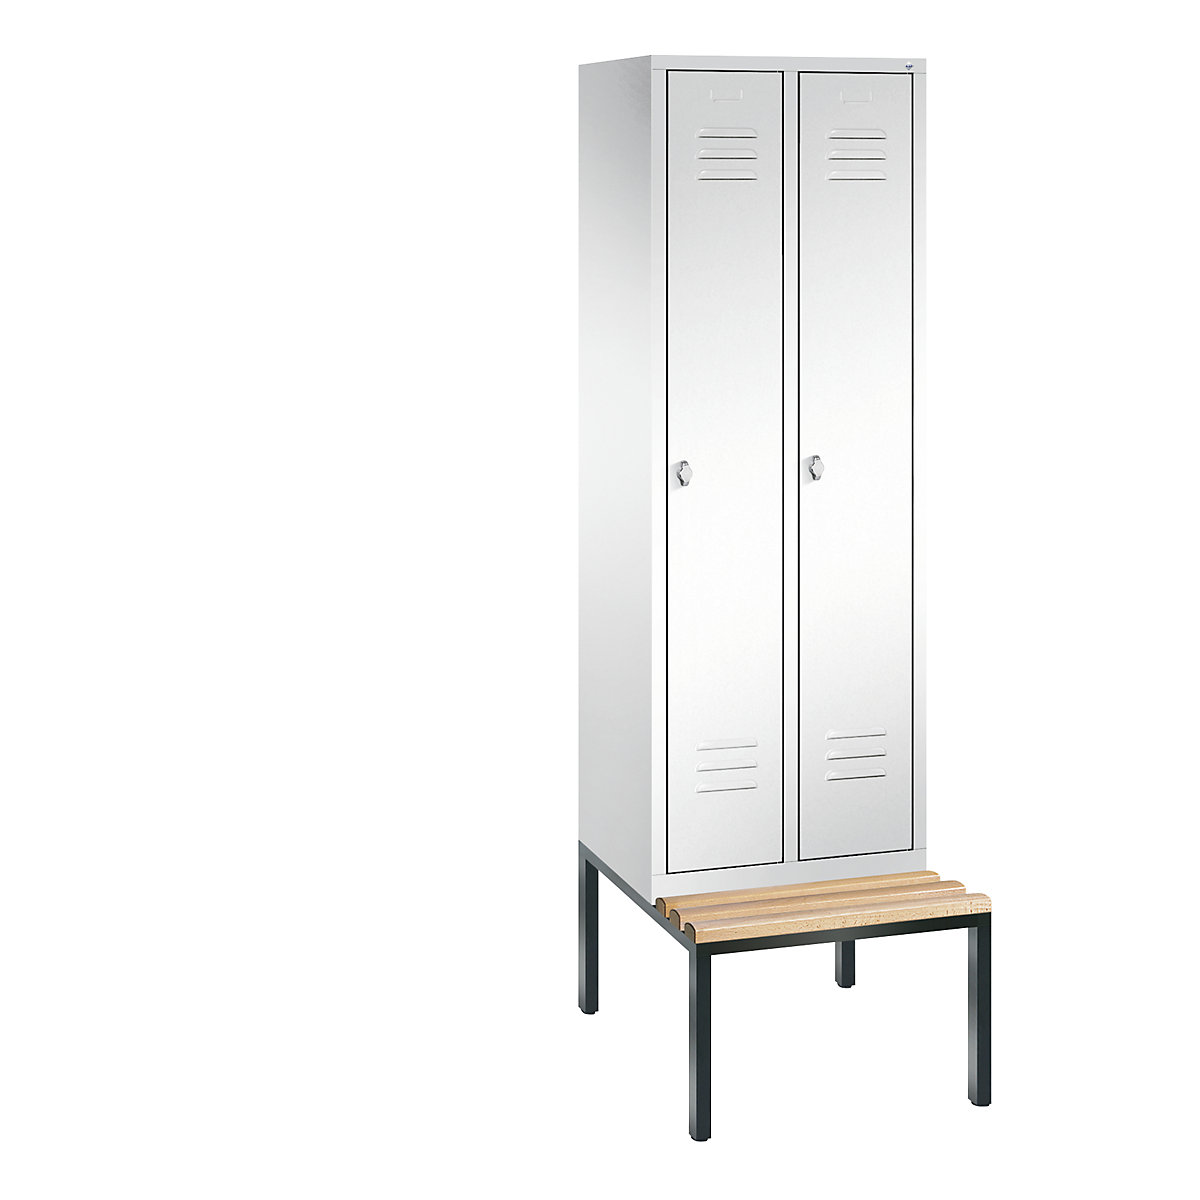 CLASSIC cloakroom locker with bench mounted underneath - C+P